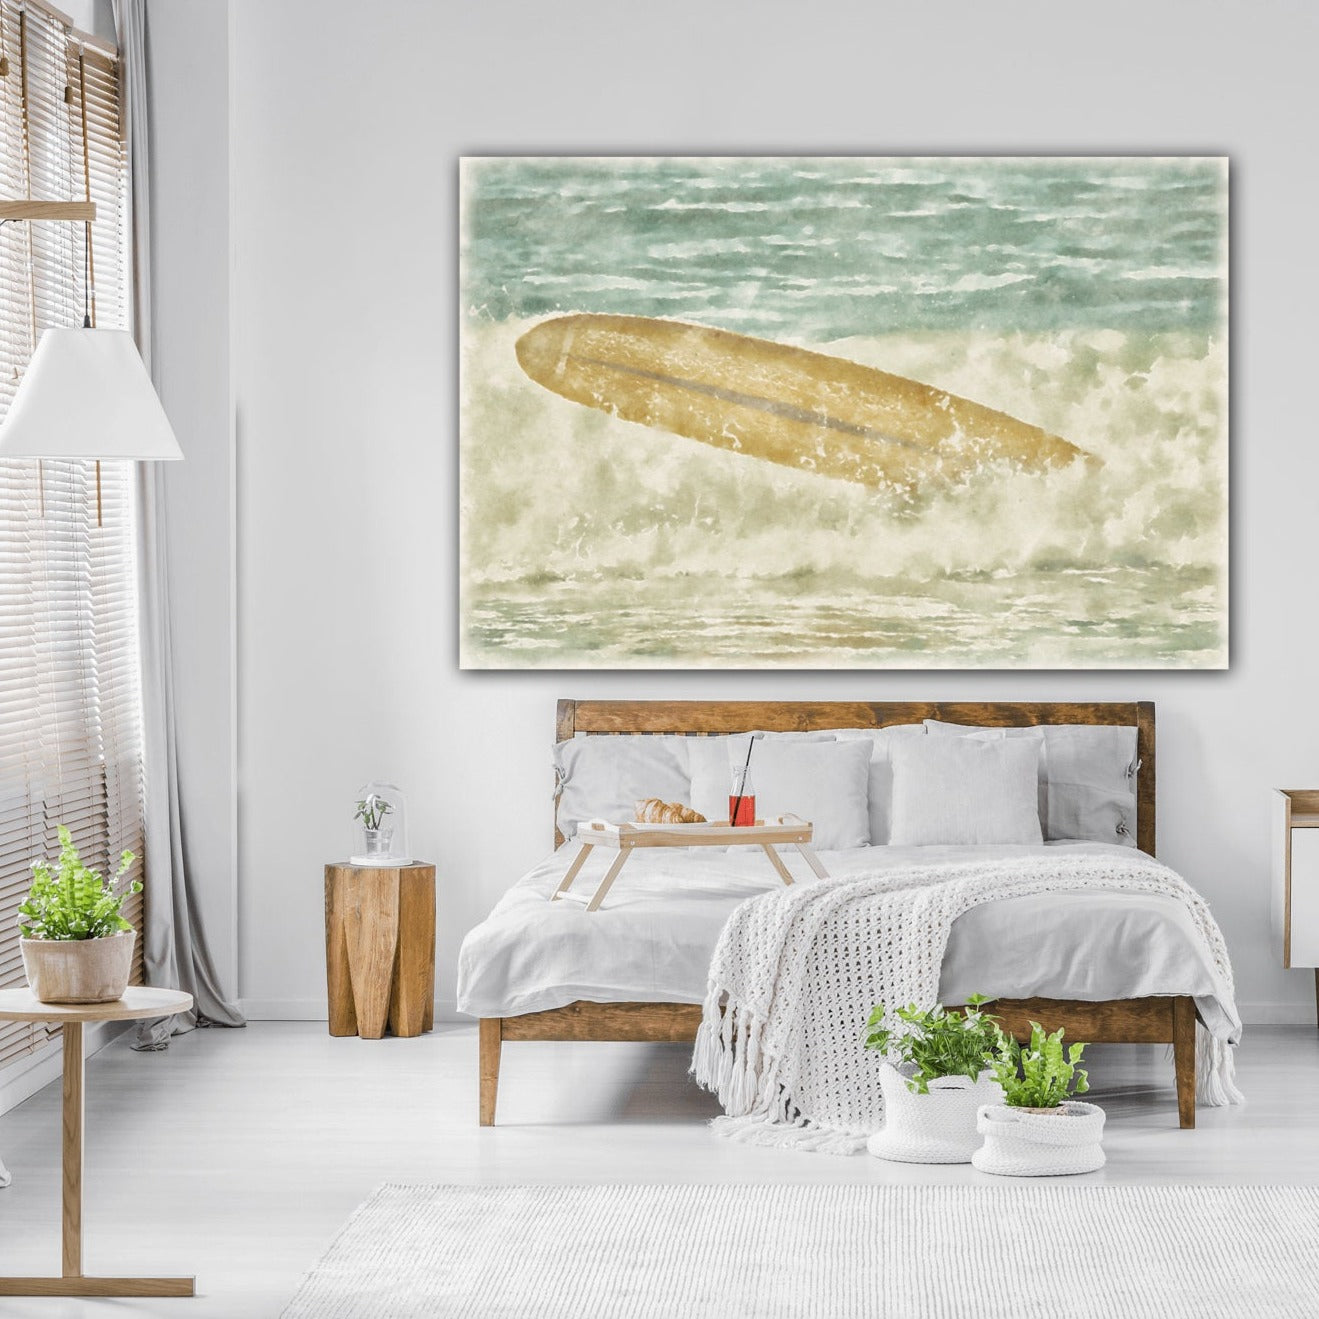 runaway surfboard canvas print  bedroom home decor by Jacqueline MB Designs 